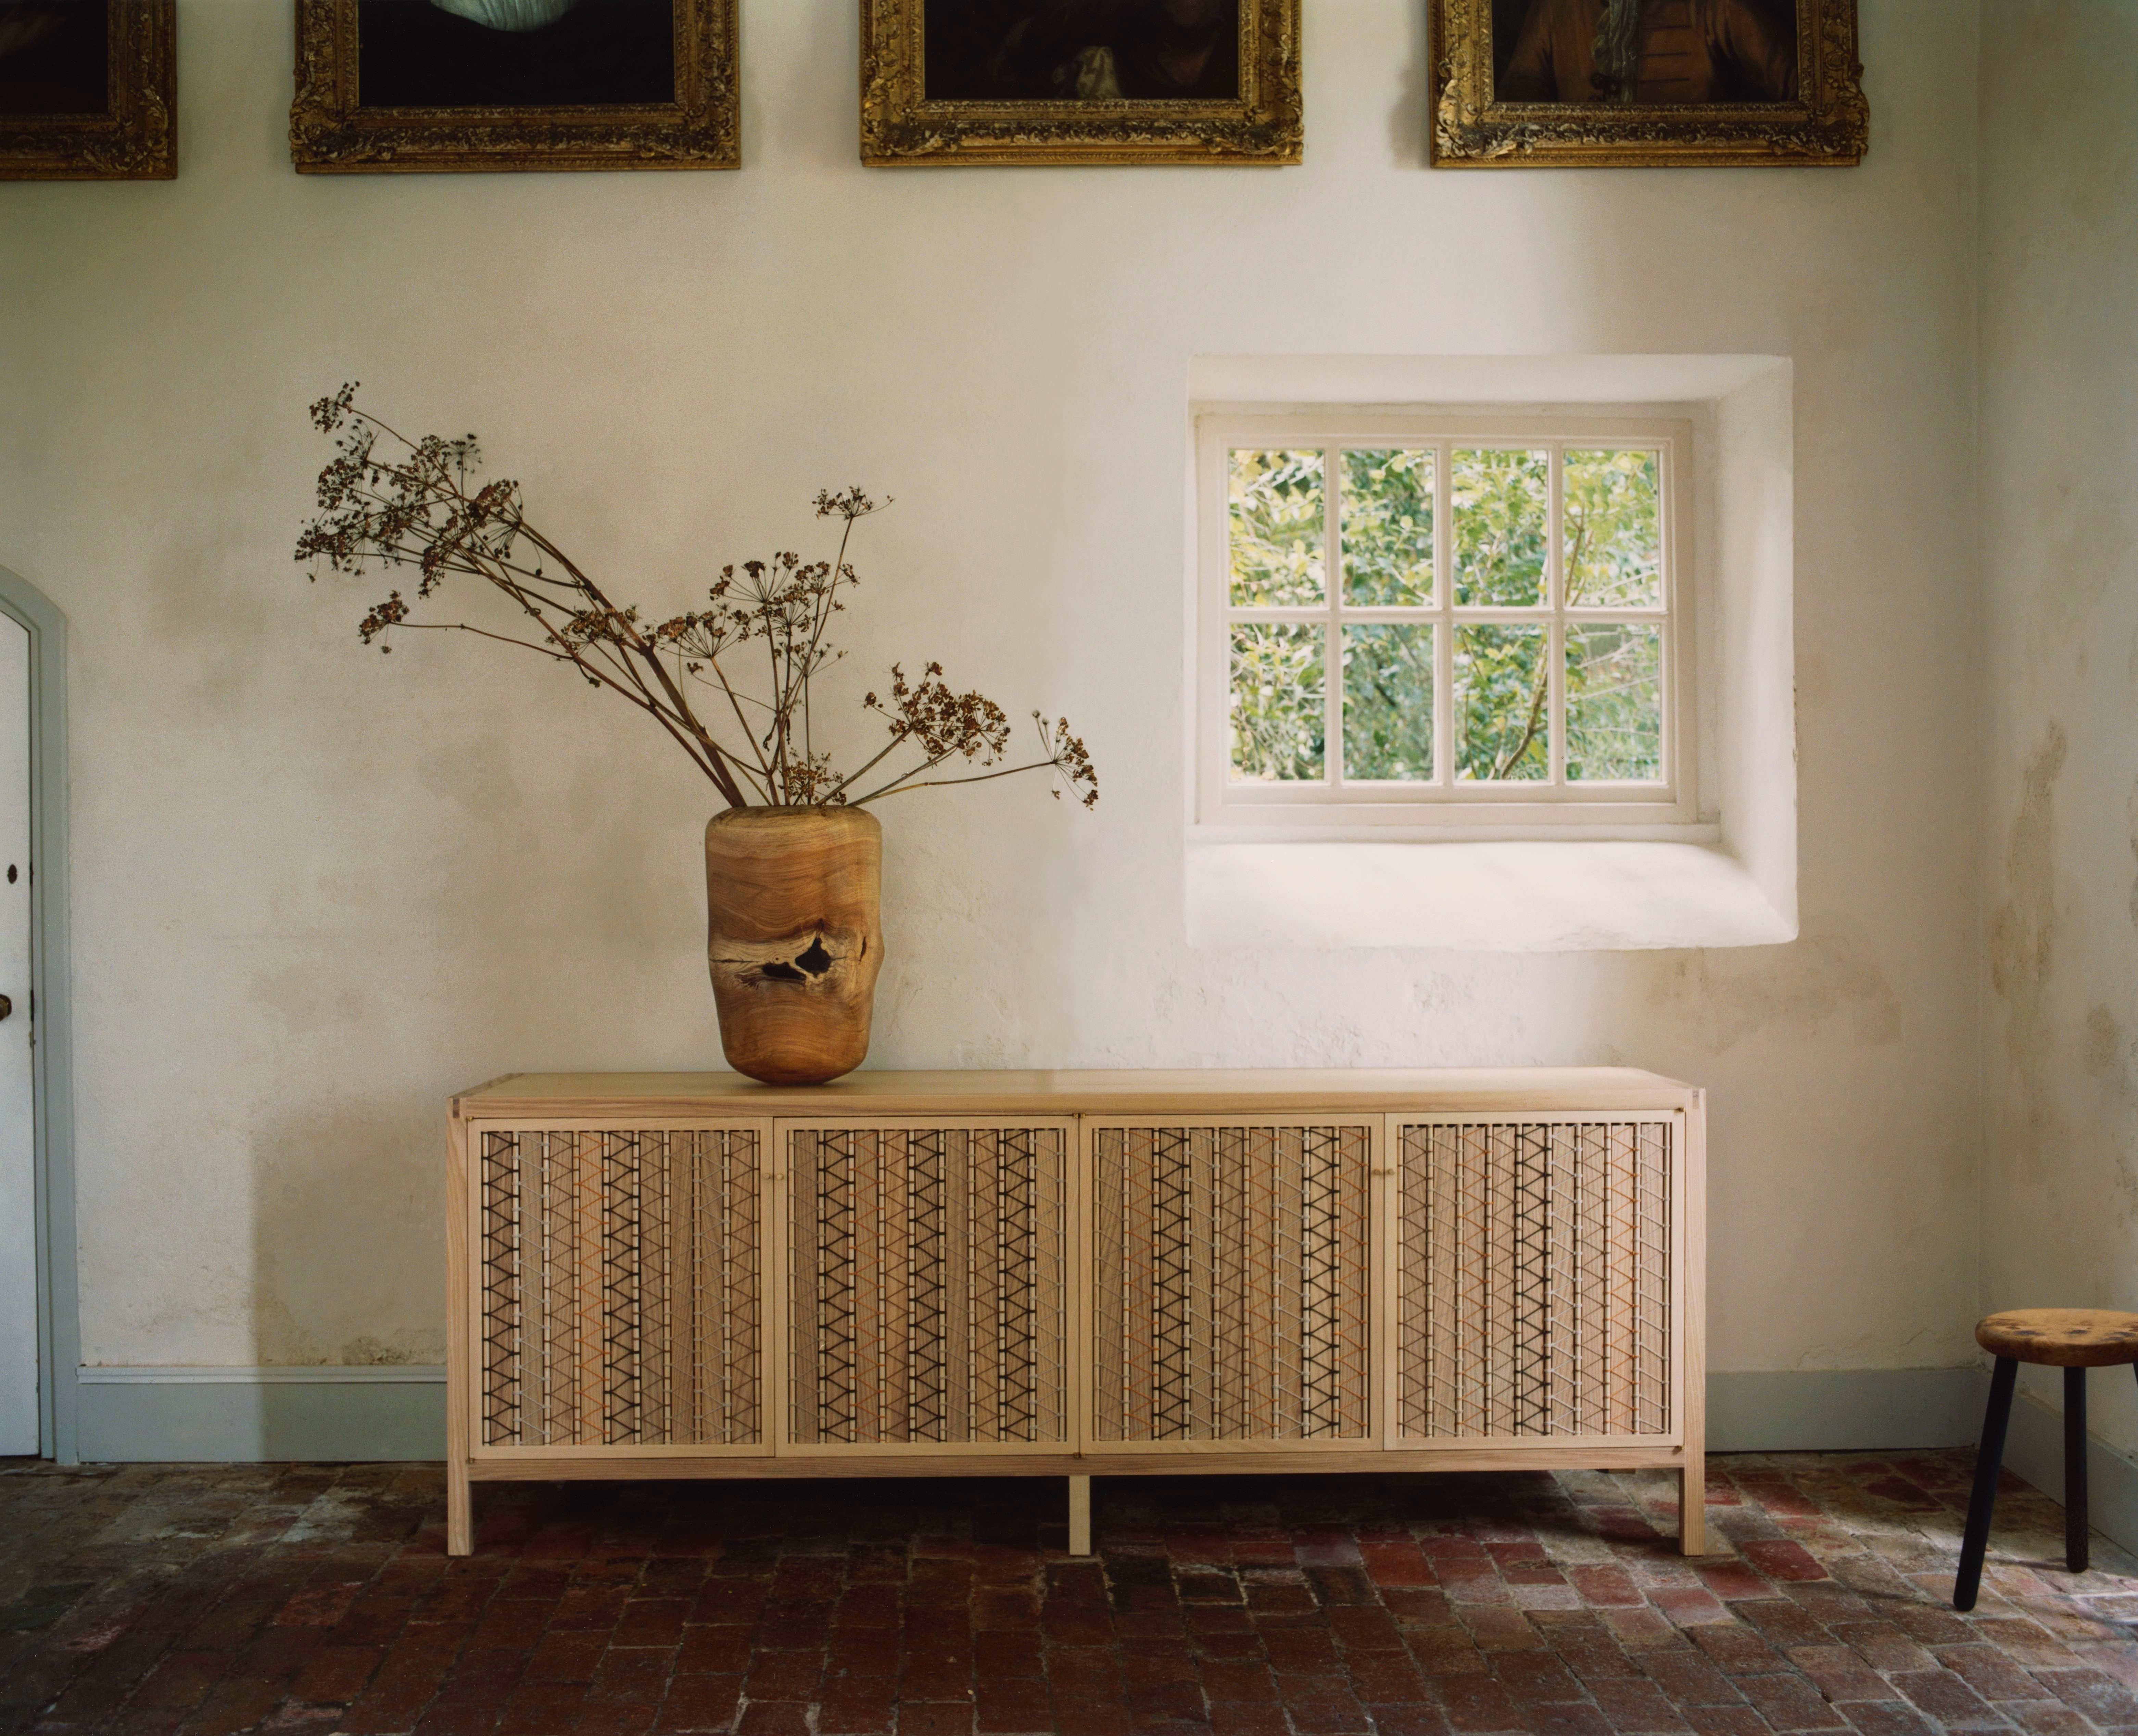 Gareth often collaborates with leading craftspeople such as Aimee Betts, who created this cabinet